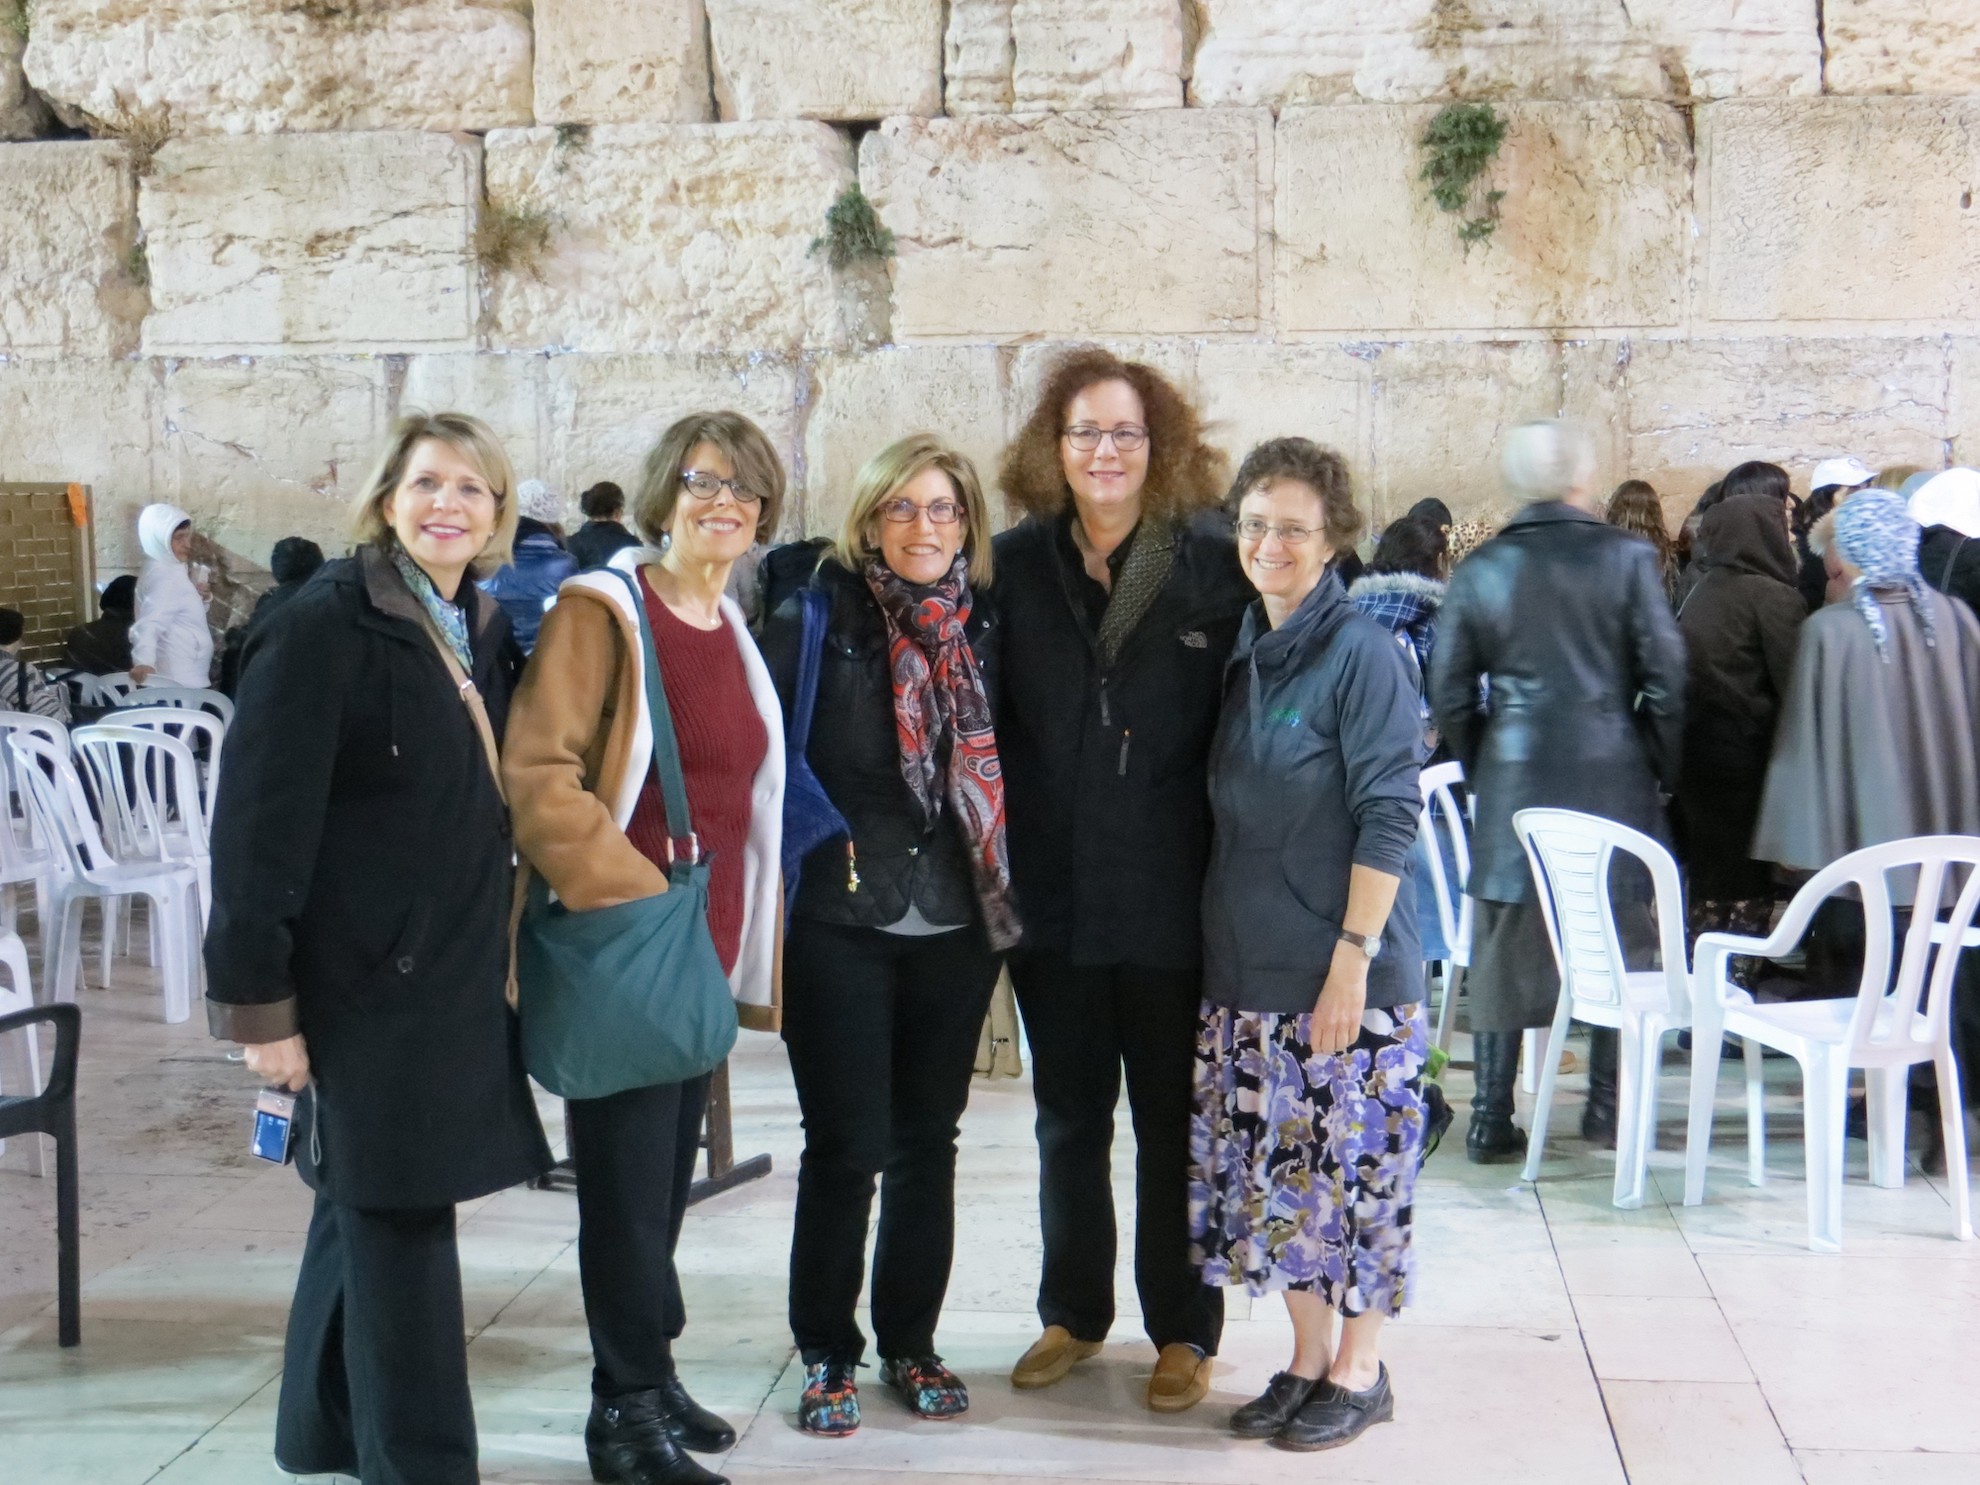 physicians trip to israel